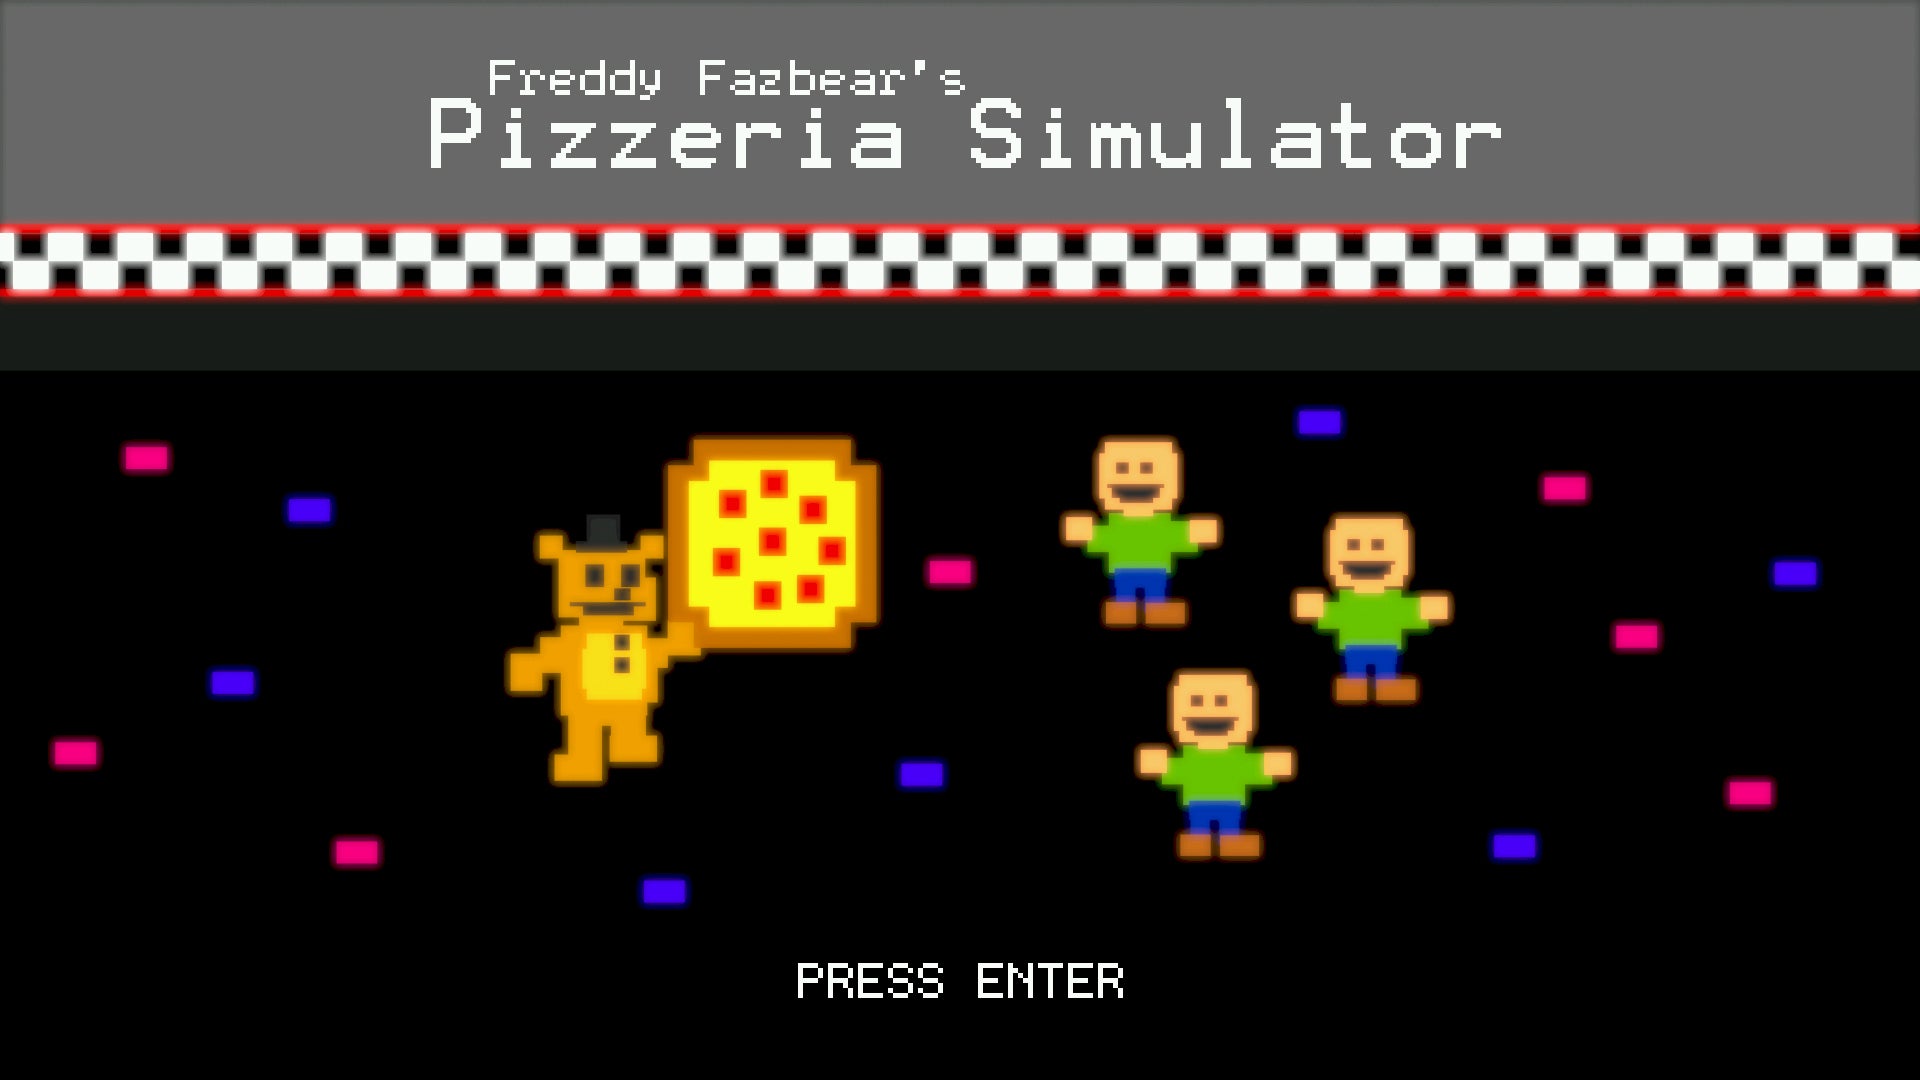 Image for There's a new Five Nights at Freddy's game out now, cheerfully disguised as a free pizzeria simulator